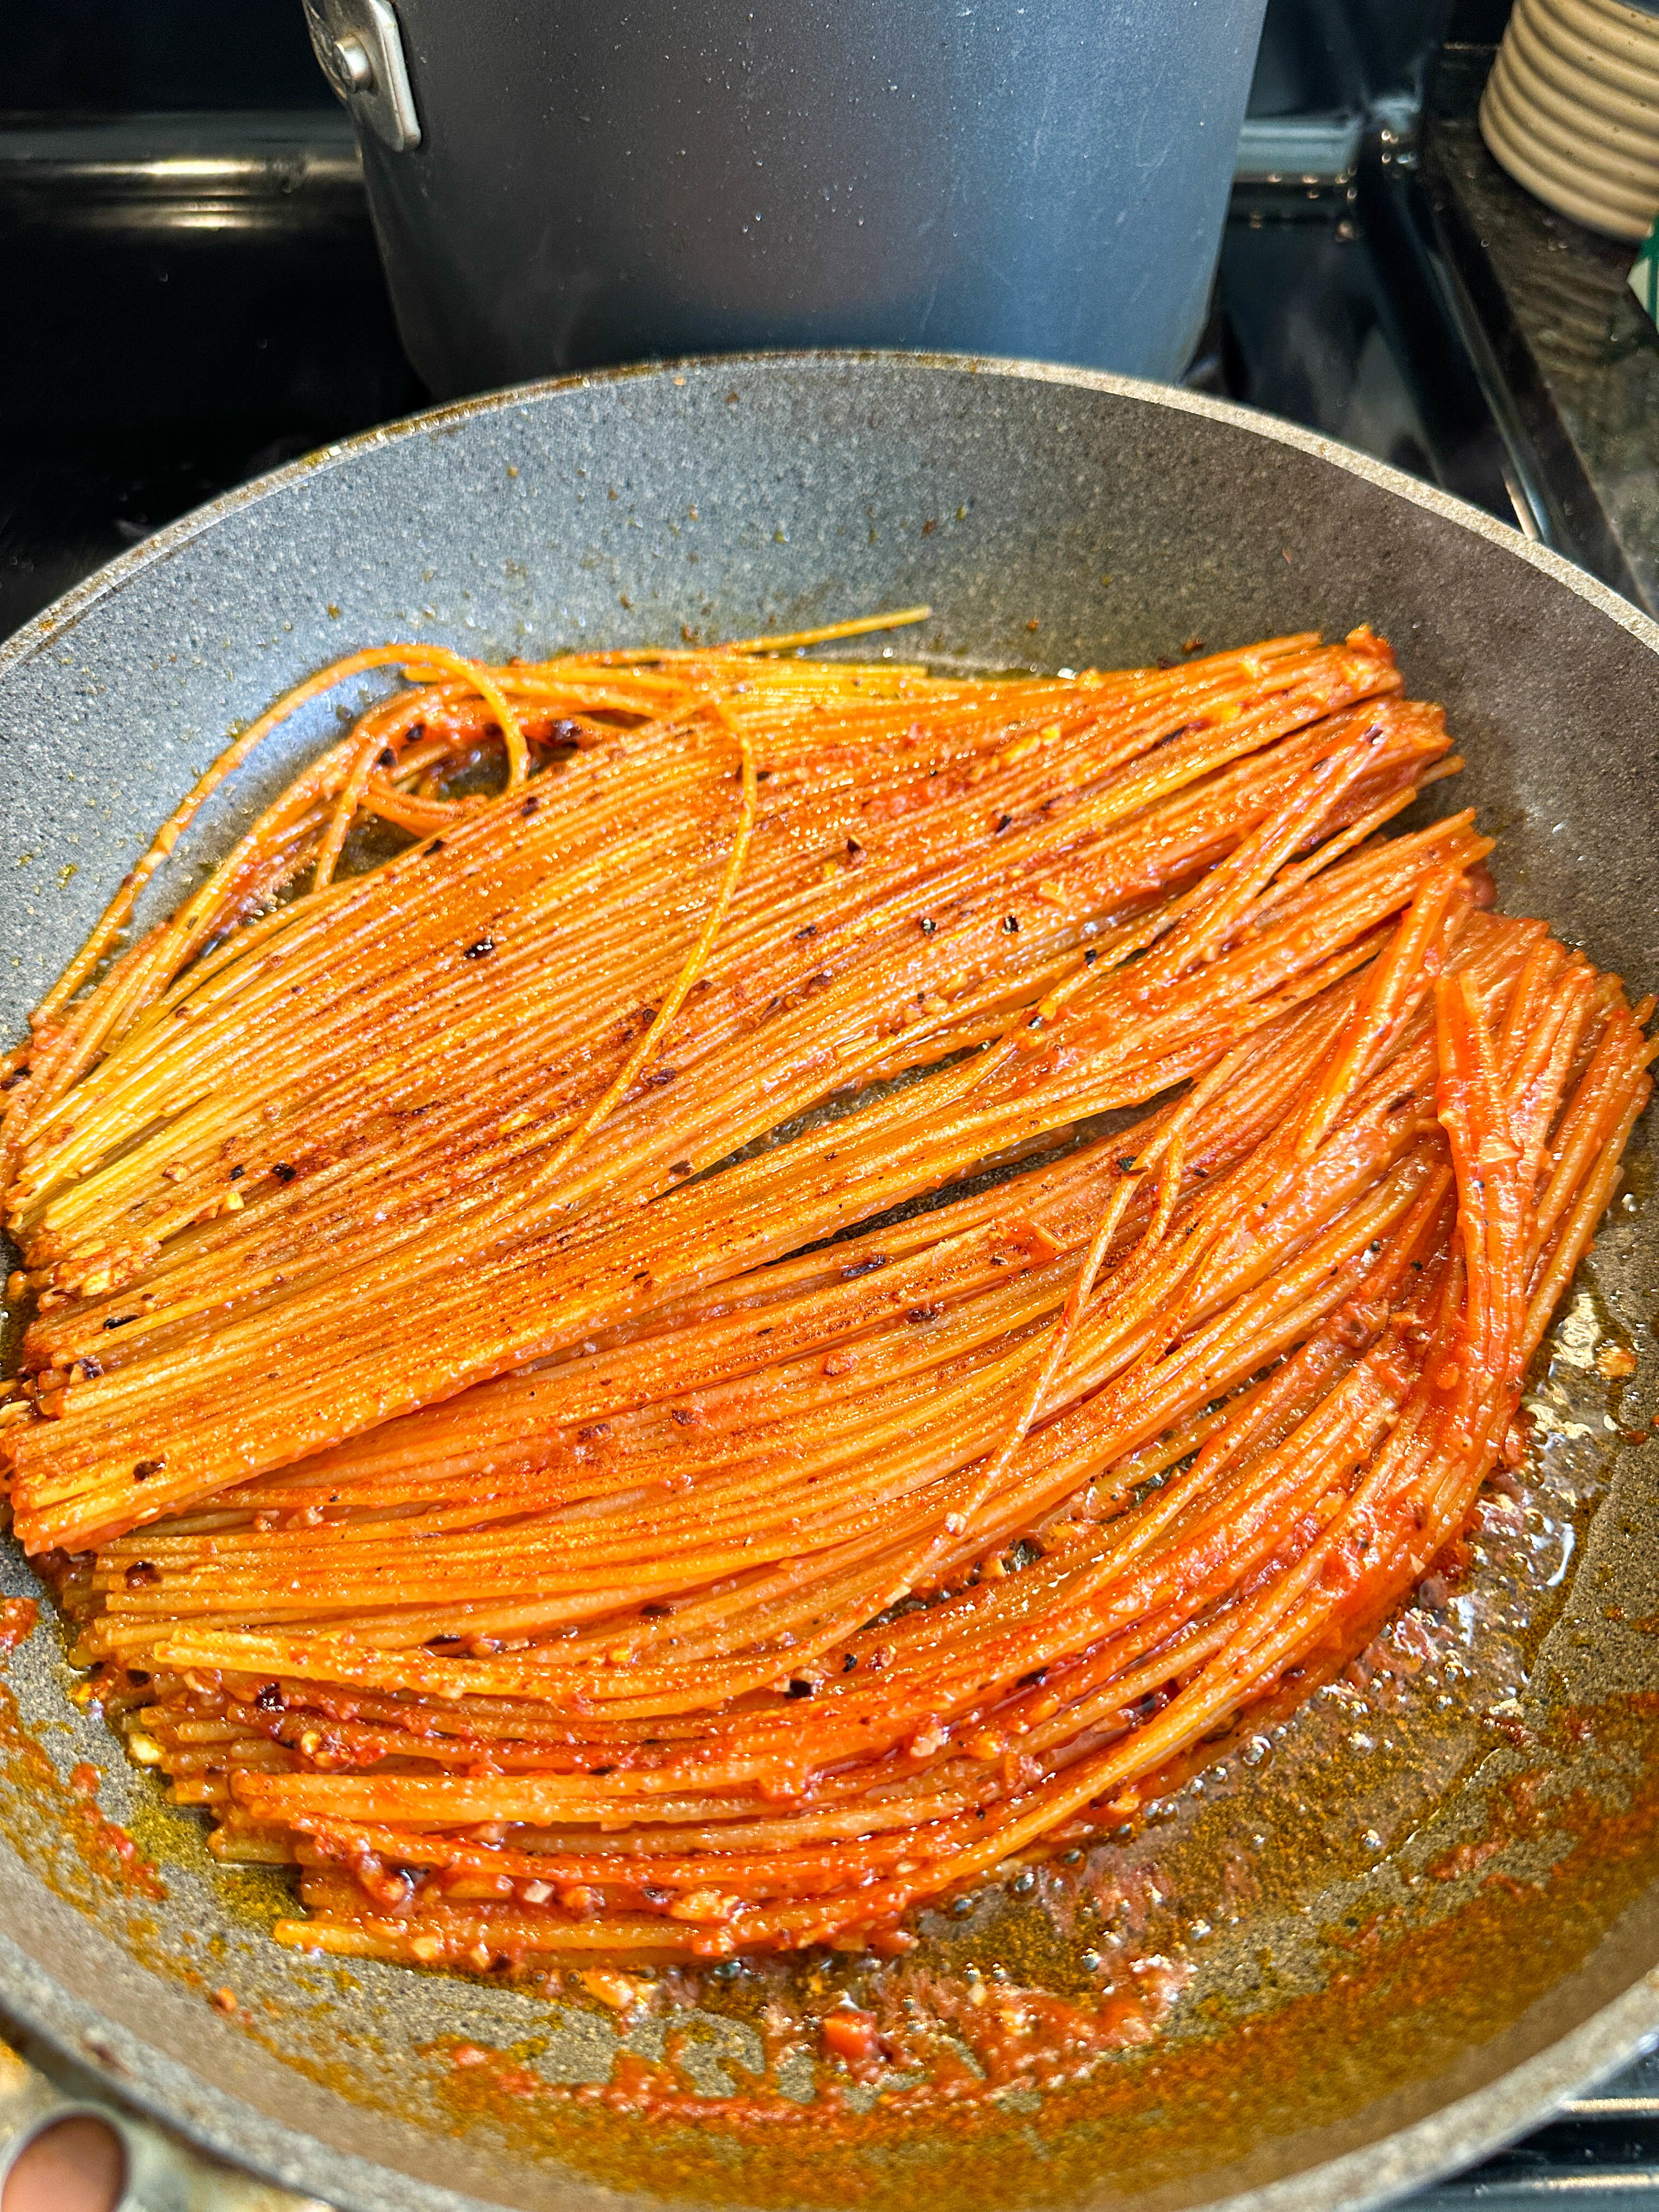 Spaghetti being cooked in a pan with tomato sauce